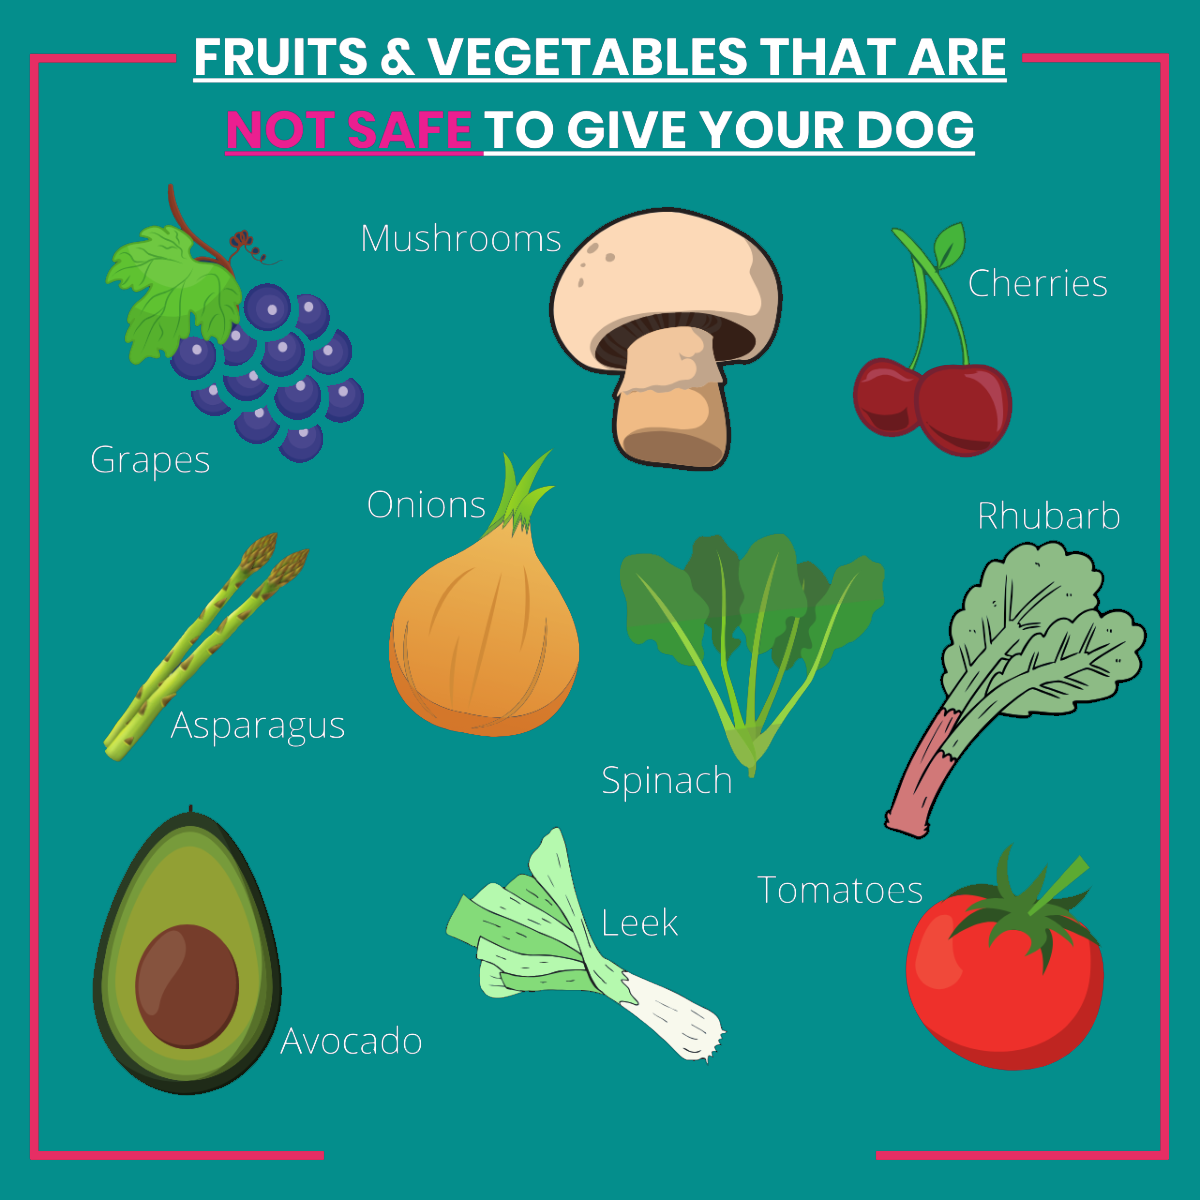 A graphic of fruits and vegetables that are NOT safe for dogs to eat